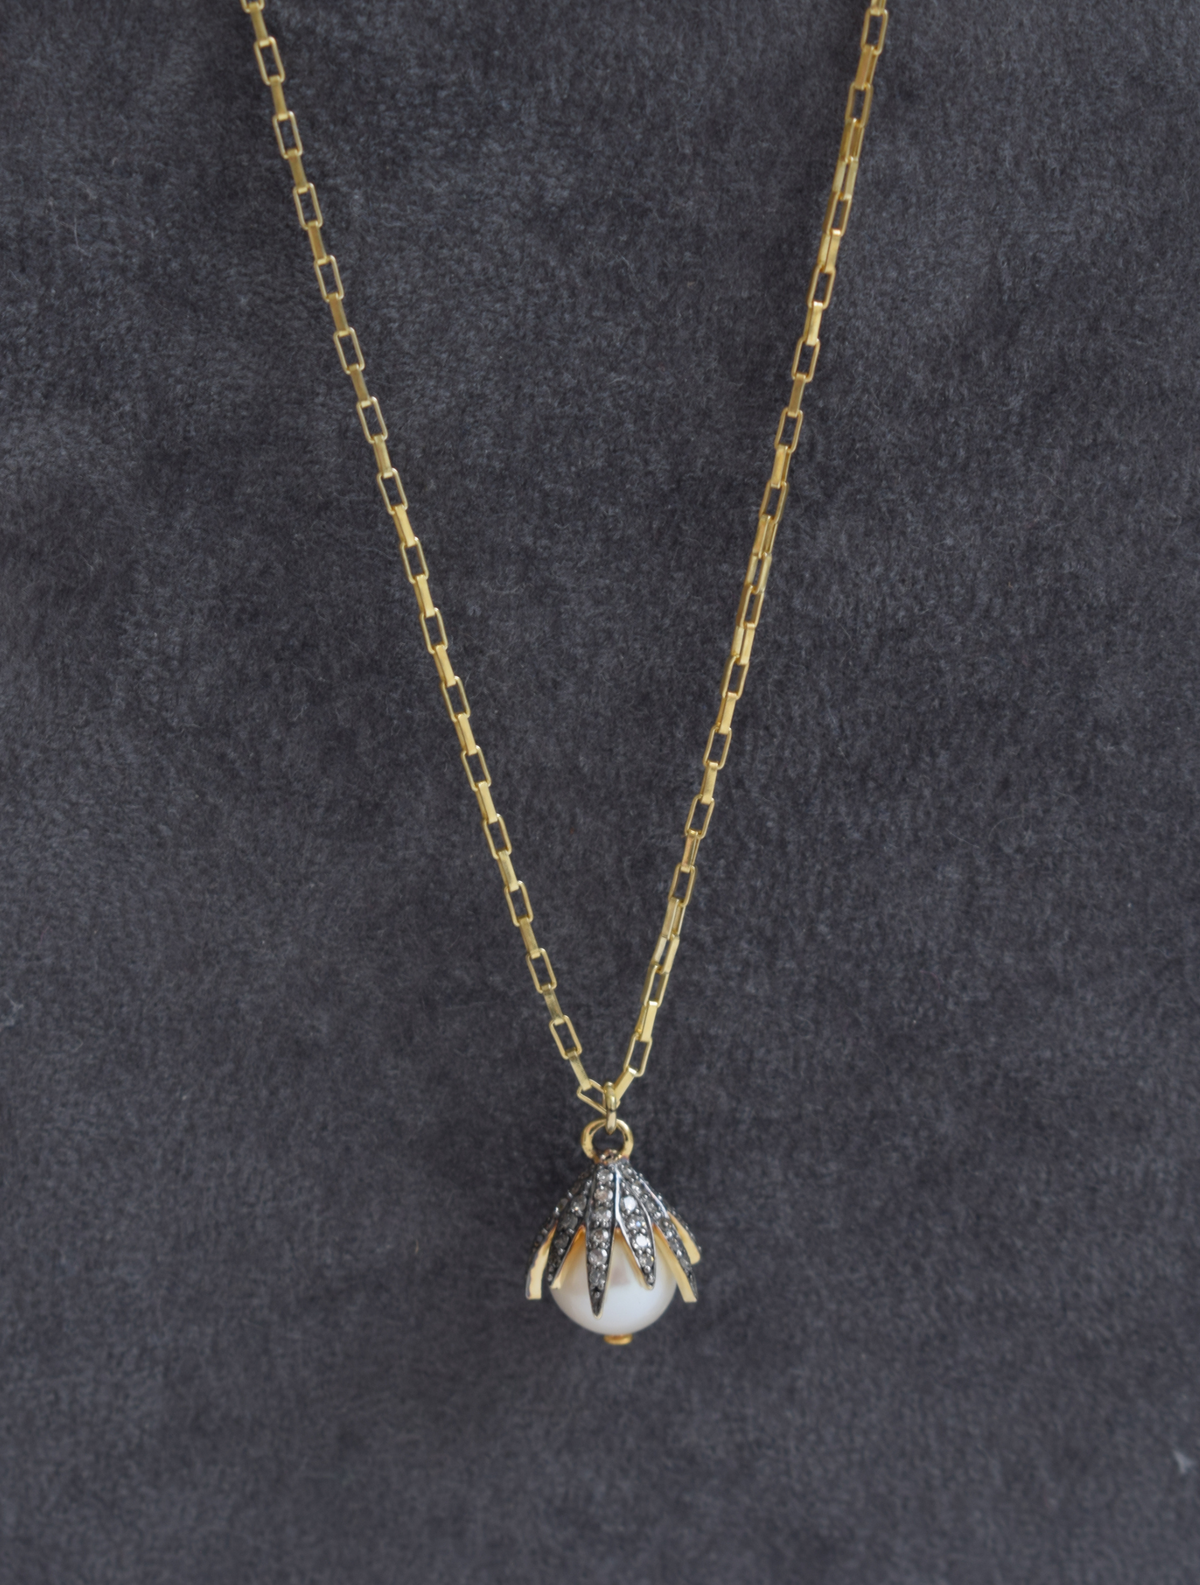 Gold chain necklace with a pearl claw